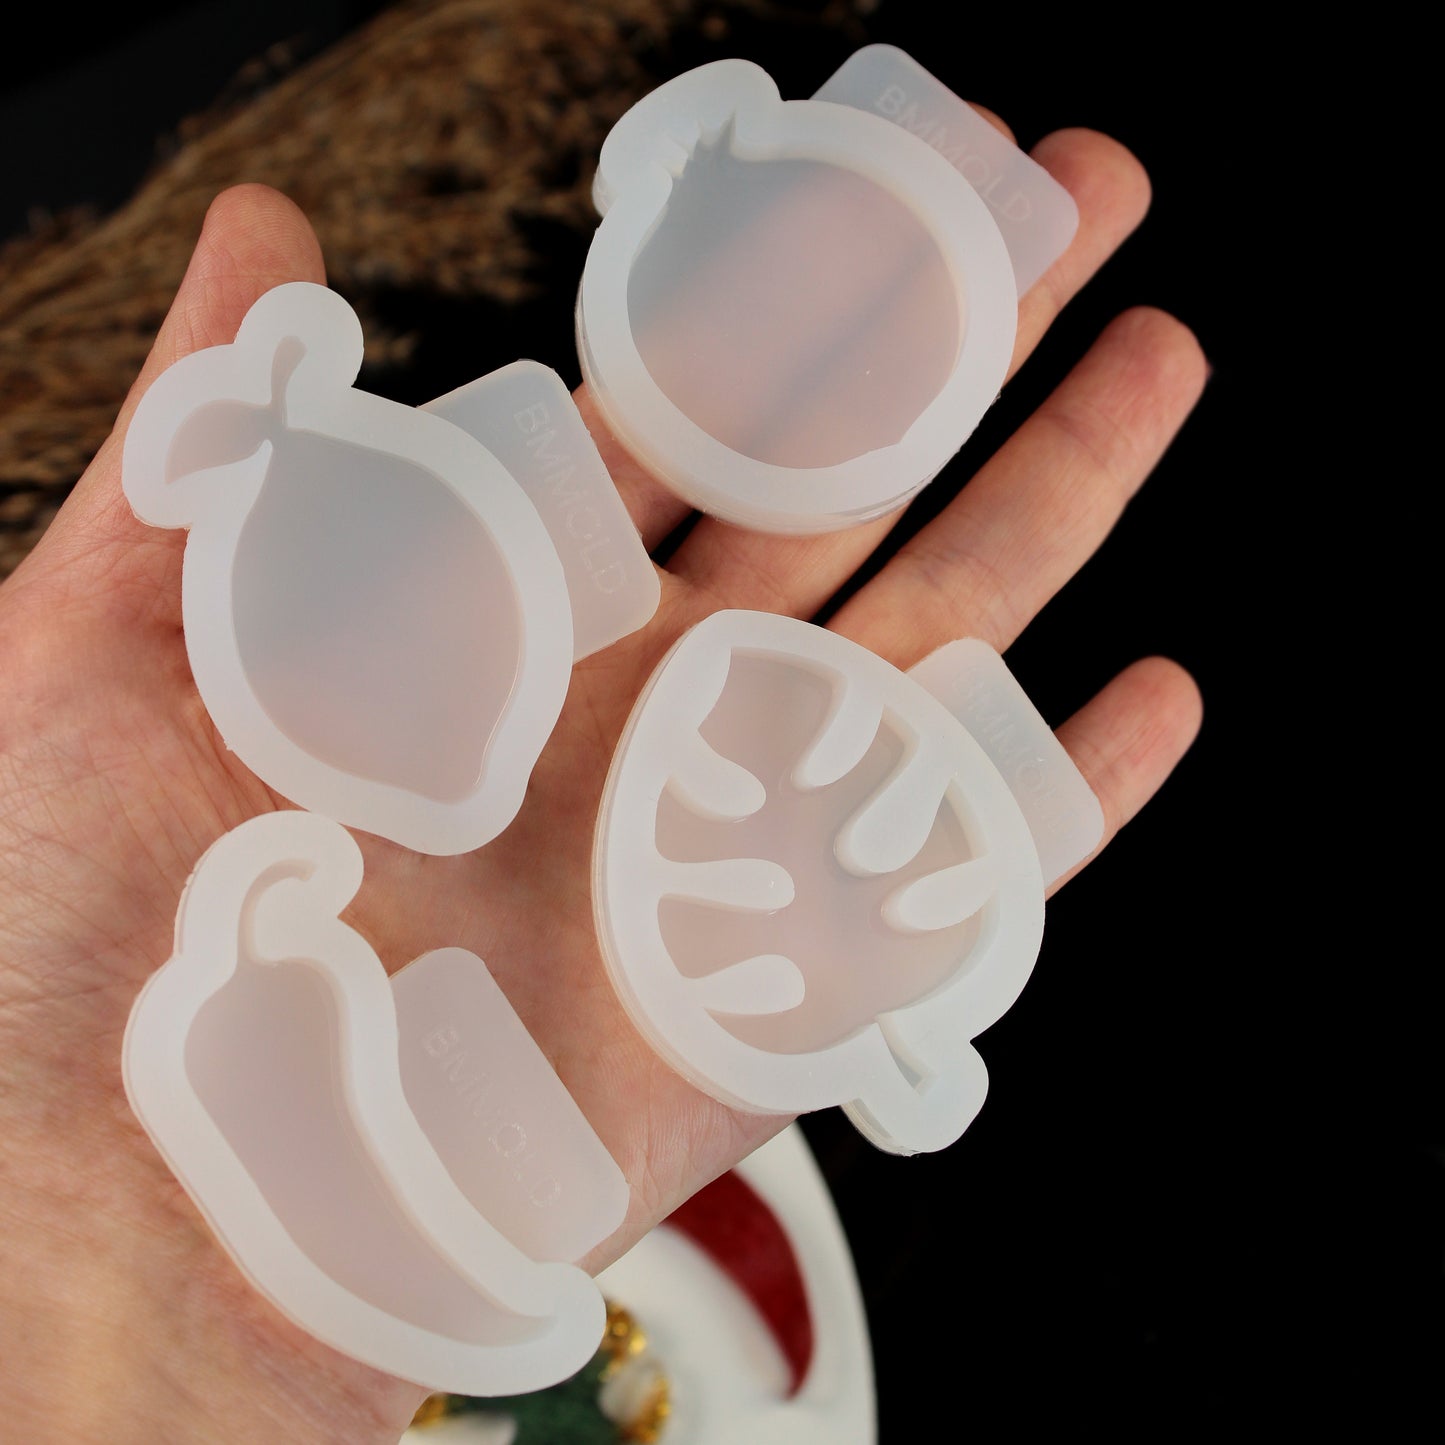 Tropical Delights: Lemon, Pomegranate, Chili Pepper, and Monster Leaf Silicone Molds Set